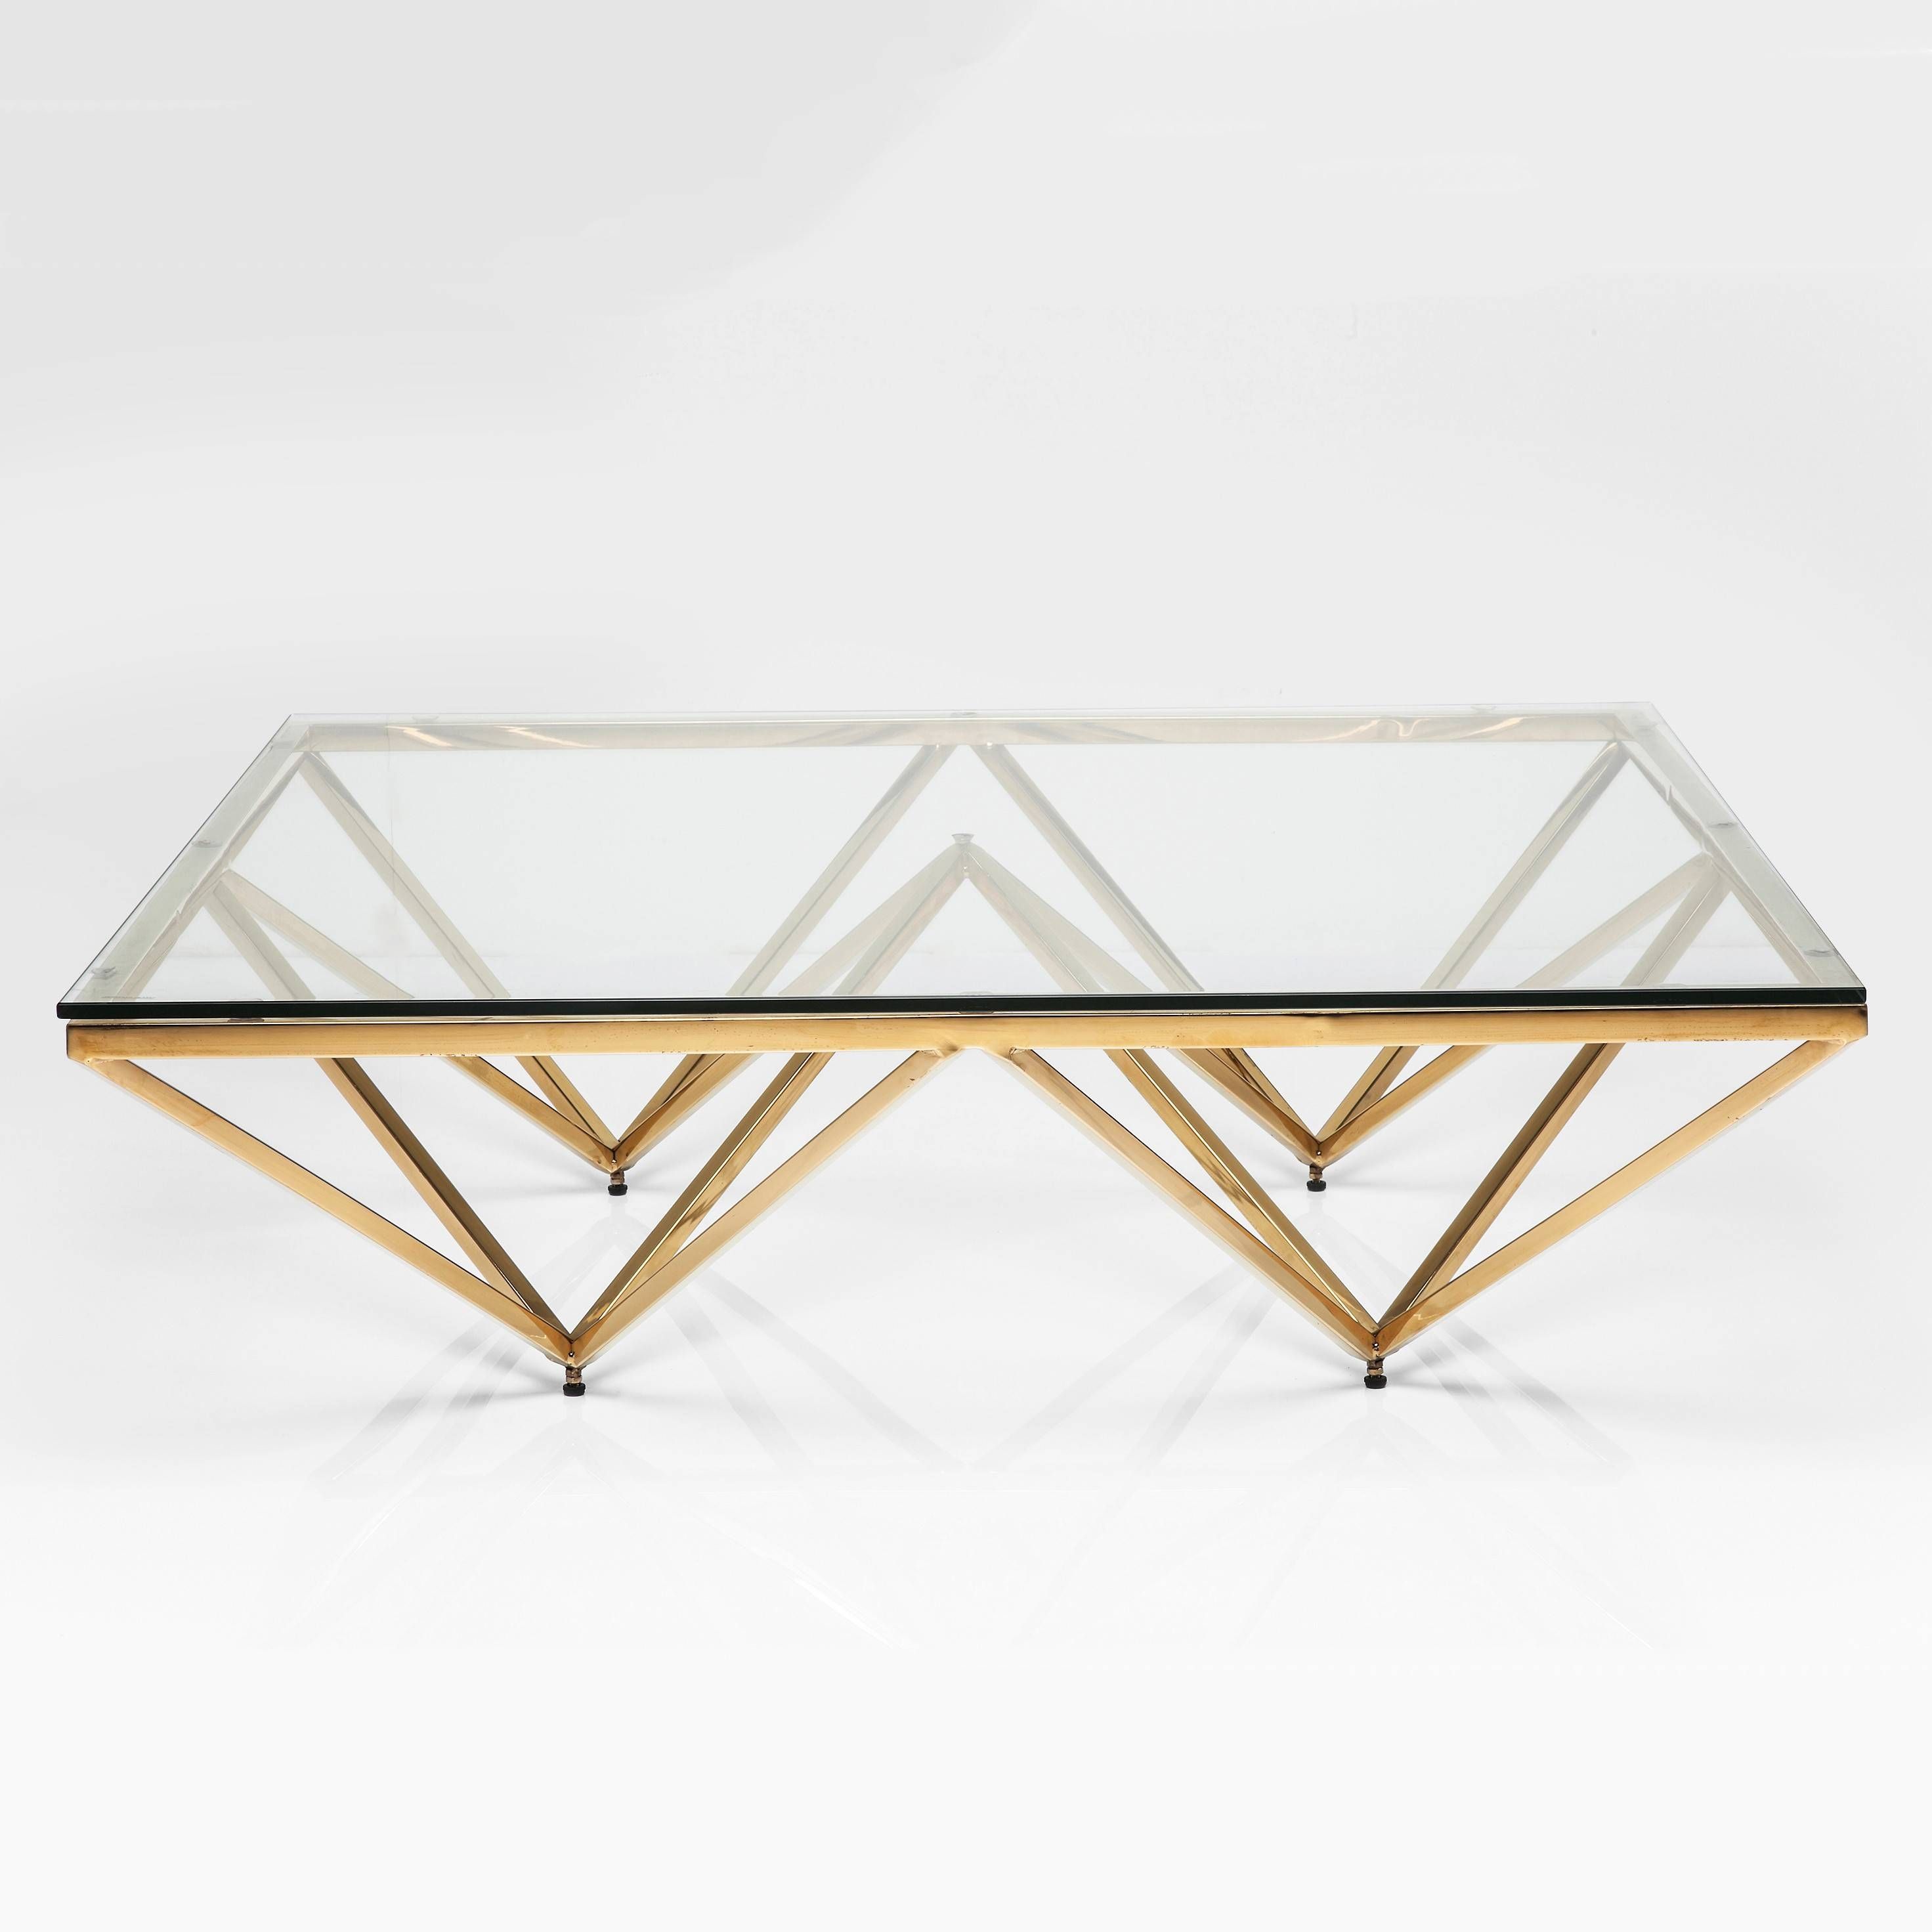 Art Deco Brass Square Glass Coffee Table | I Love Retro With Regard To Square Glass Coffee Tables (View 13 of 15)